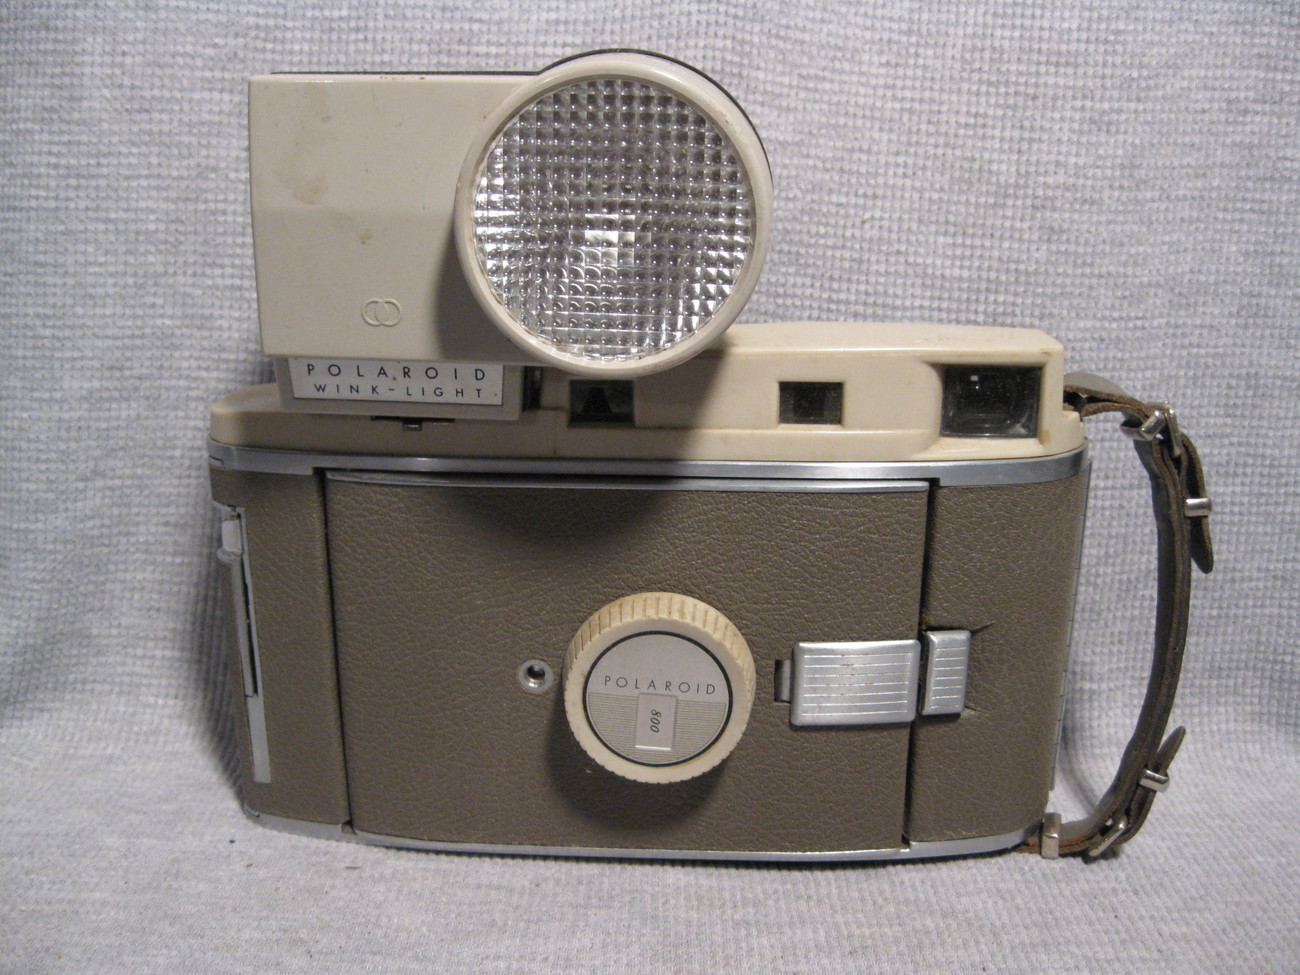 Primary image for Polaroid Model 800 Foldout Land Camera with Wink Light